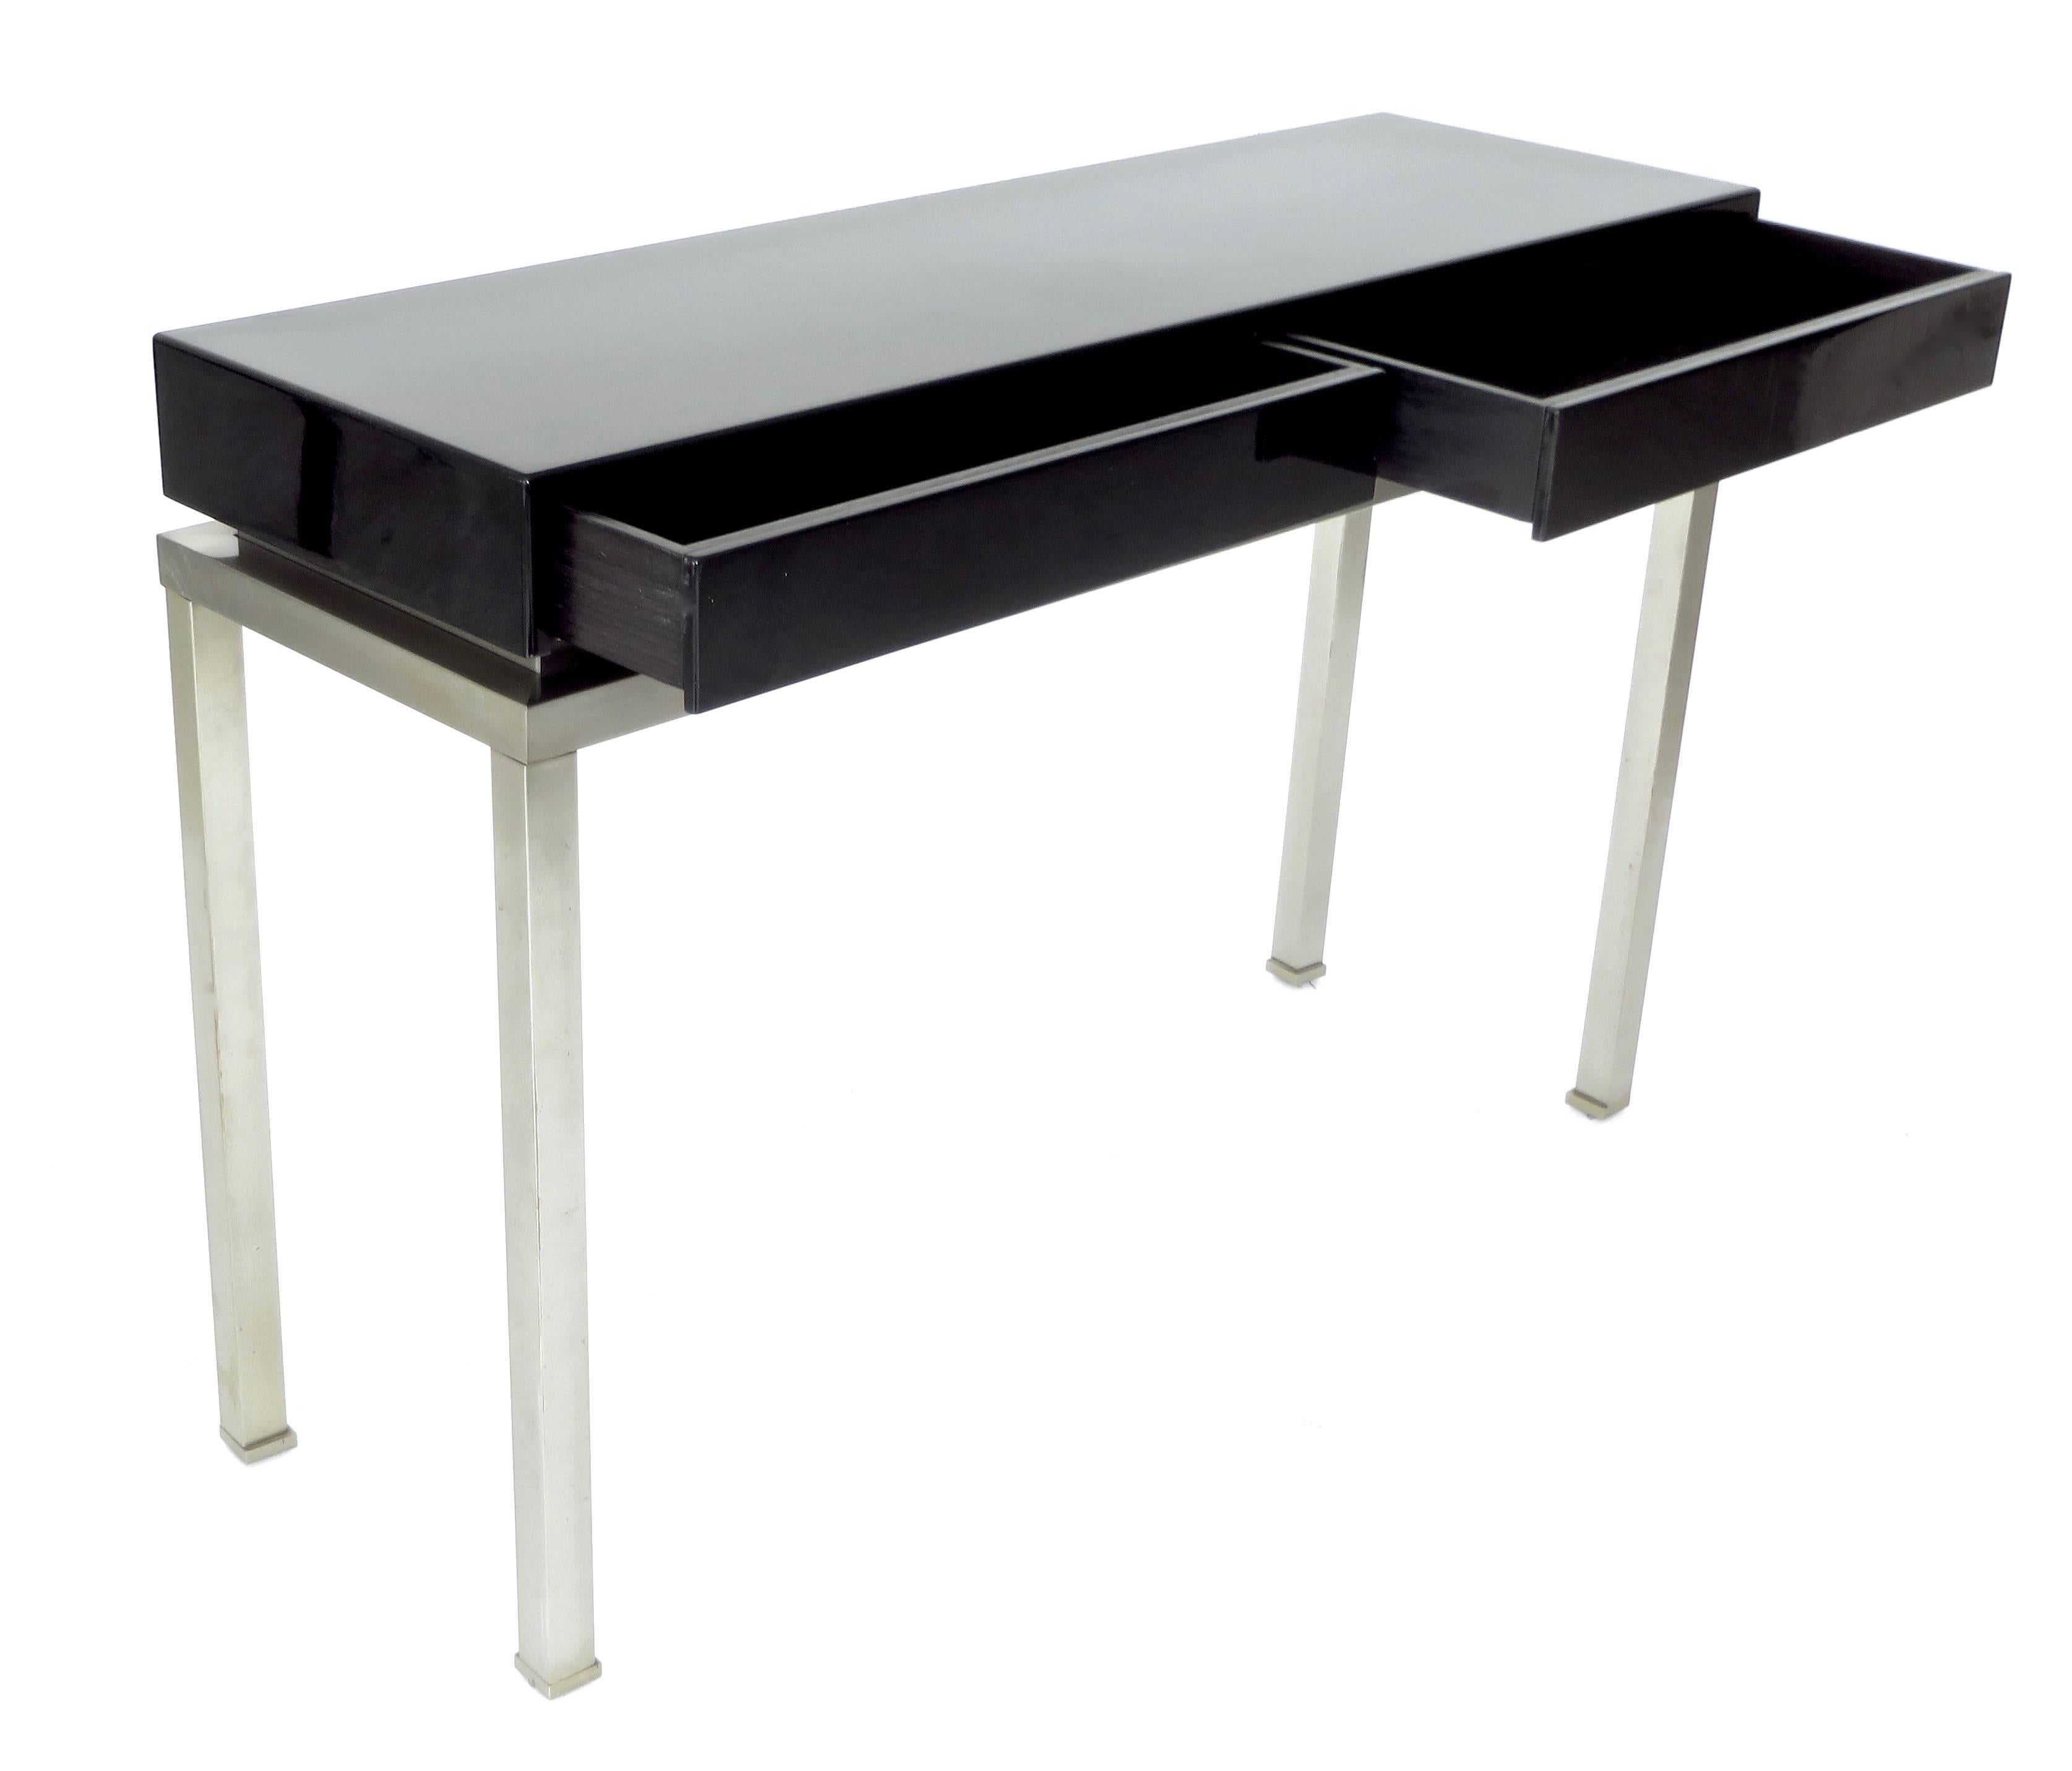  Maison Jansen French Black Lacquer and Brushed Stainless Steel Legs Console 1